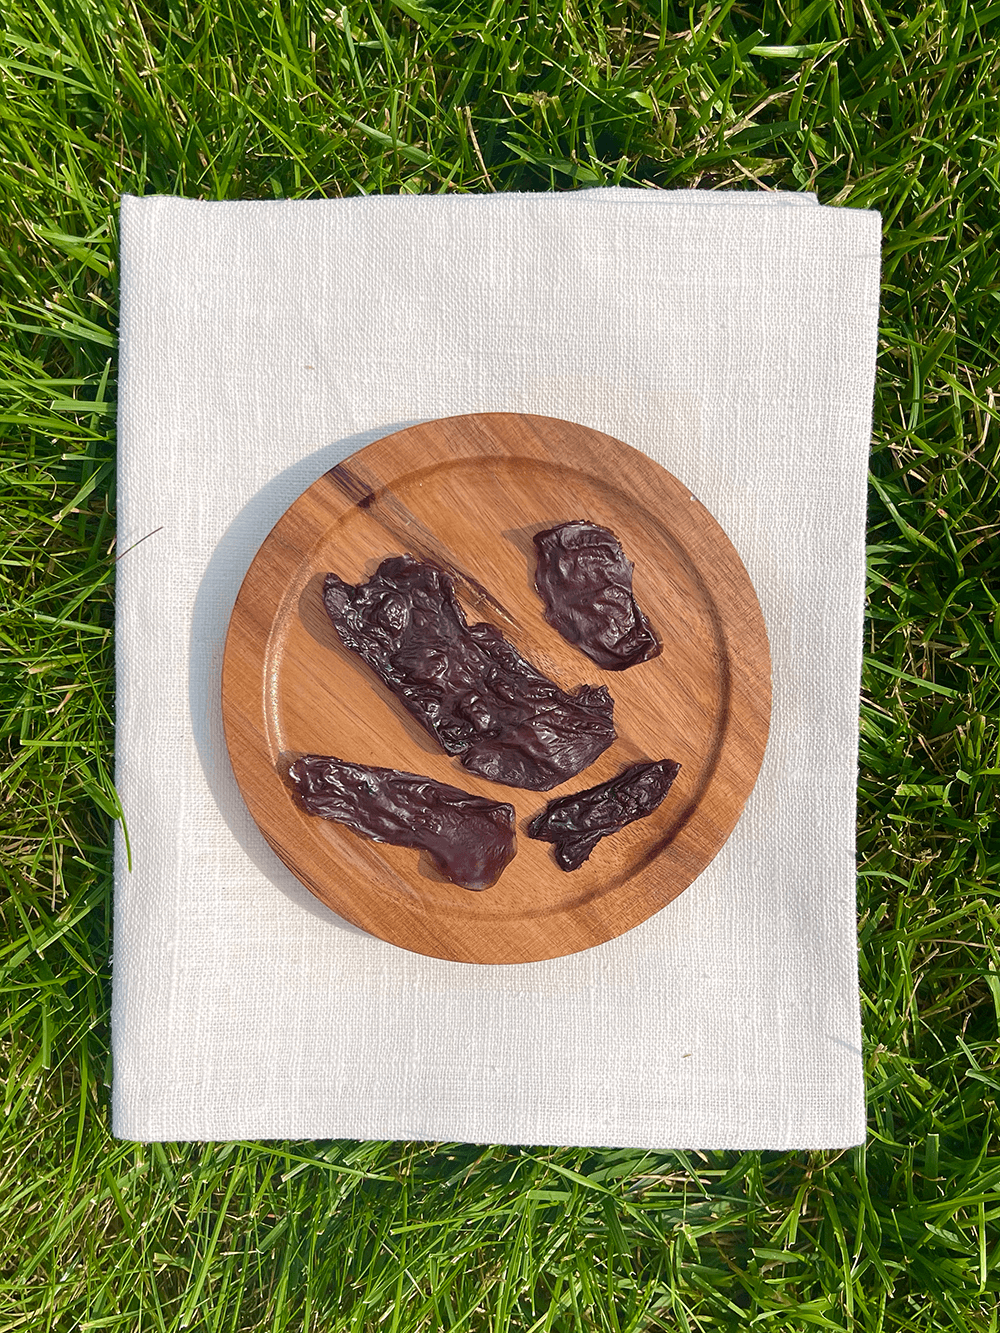 4425-chicken-liver-dehydrated-dog-treat.png